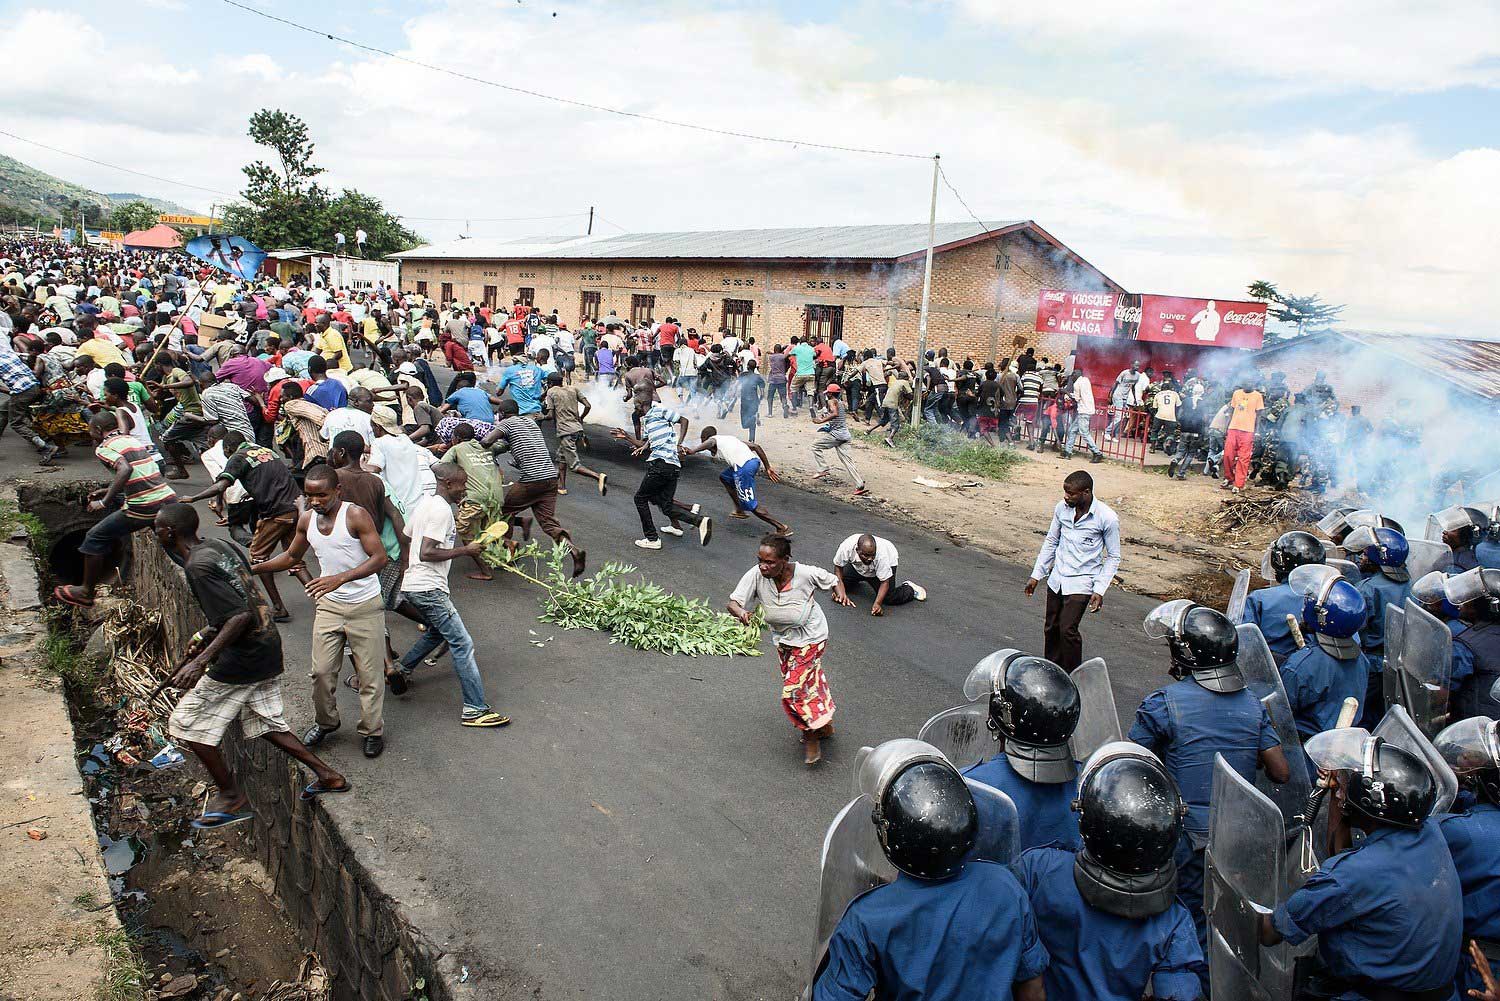 Burundi's policemen and army forces face protestors during a demonstration against incumbent president Pierre Nkurunziza's bid for a 3rd term in Bujumbur on May 13, 2015.